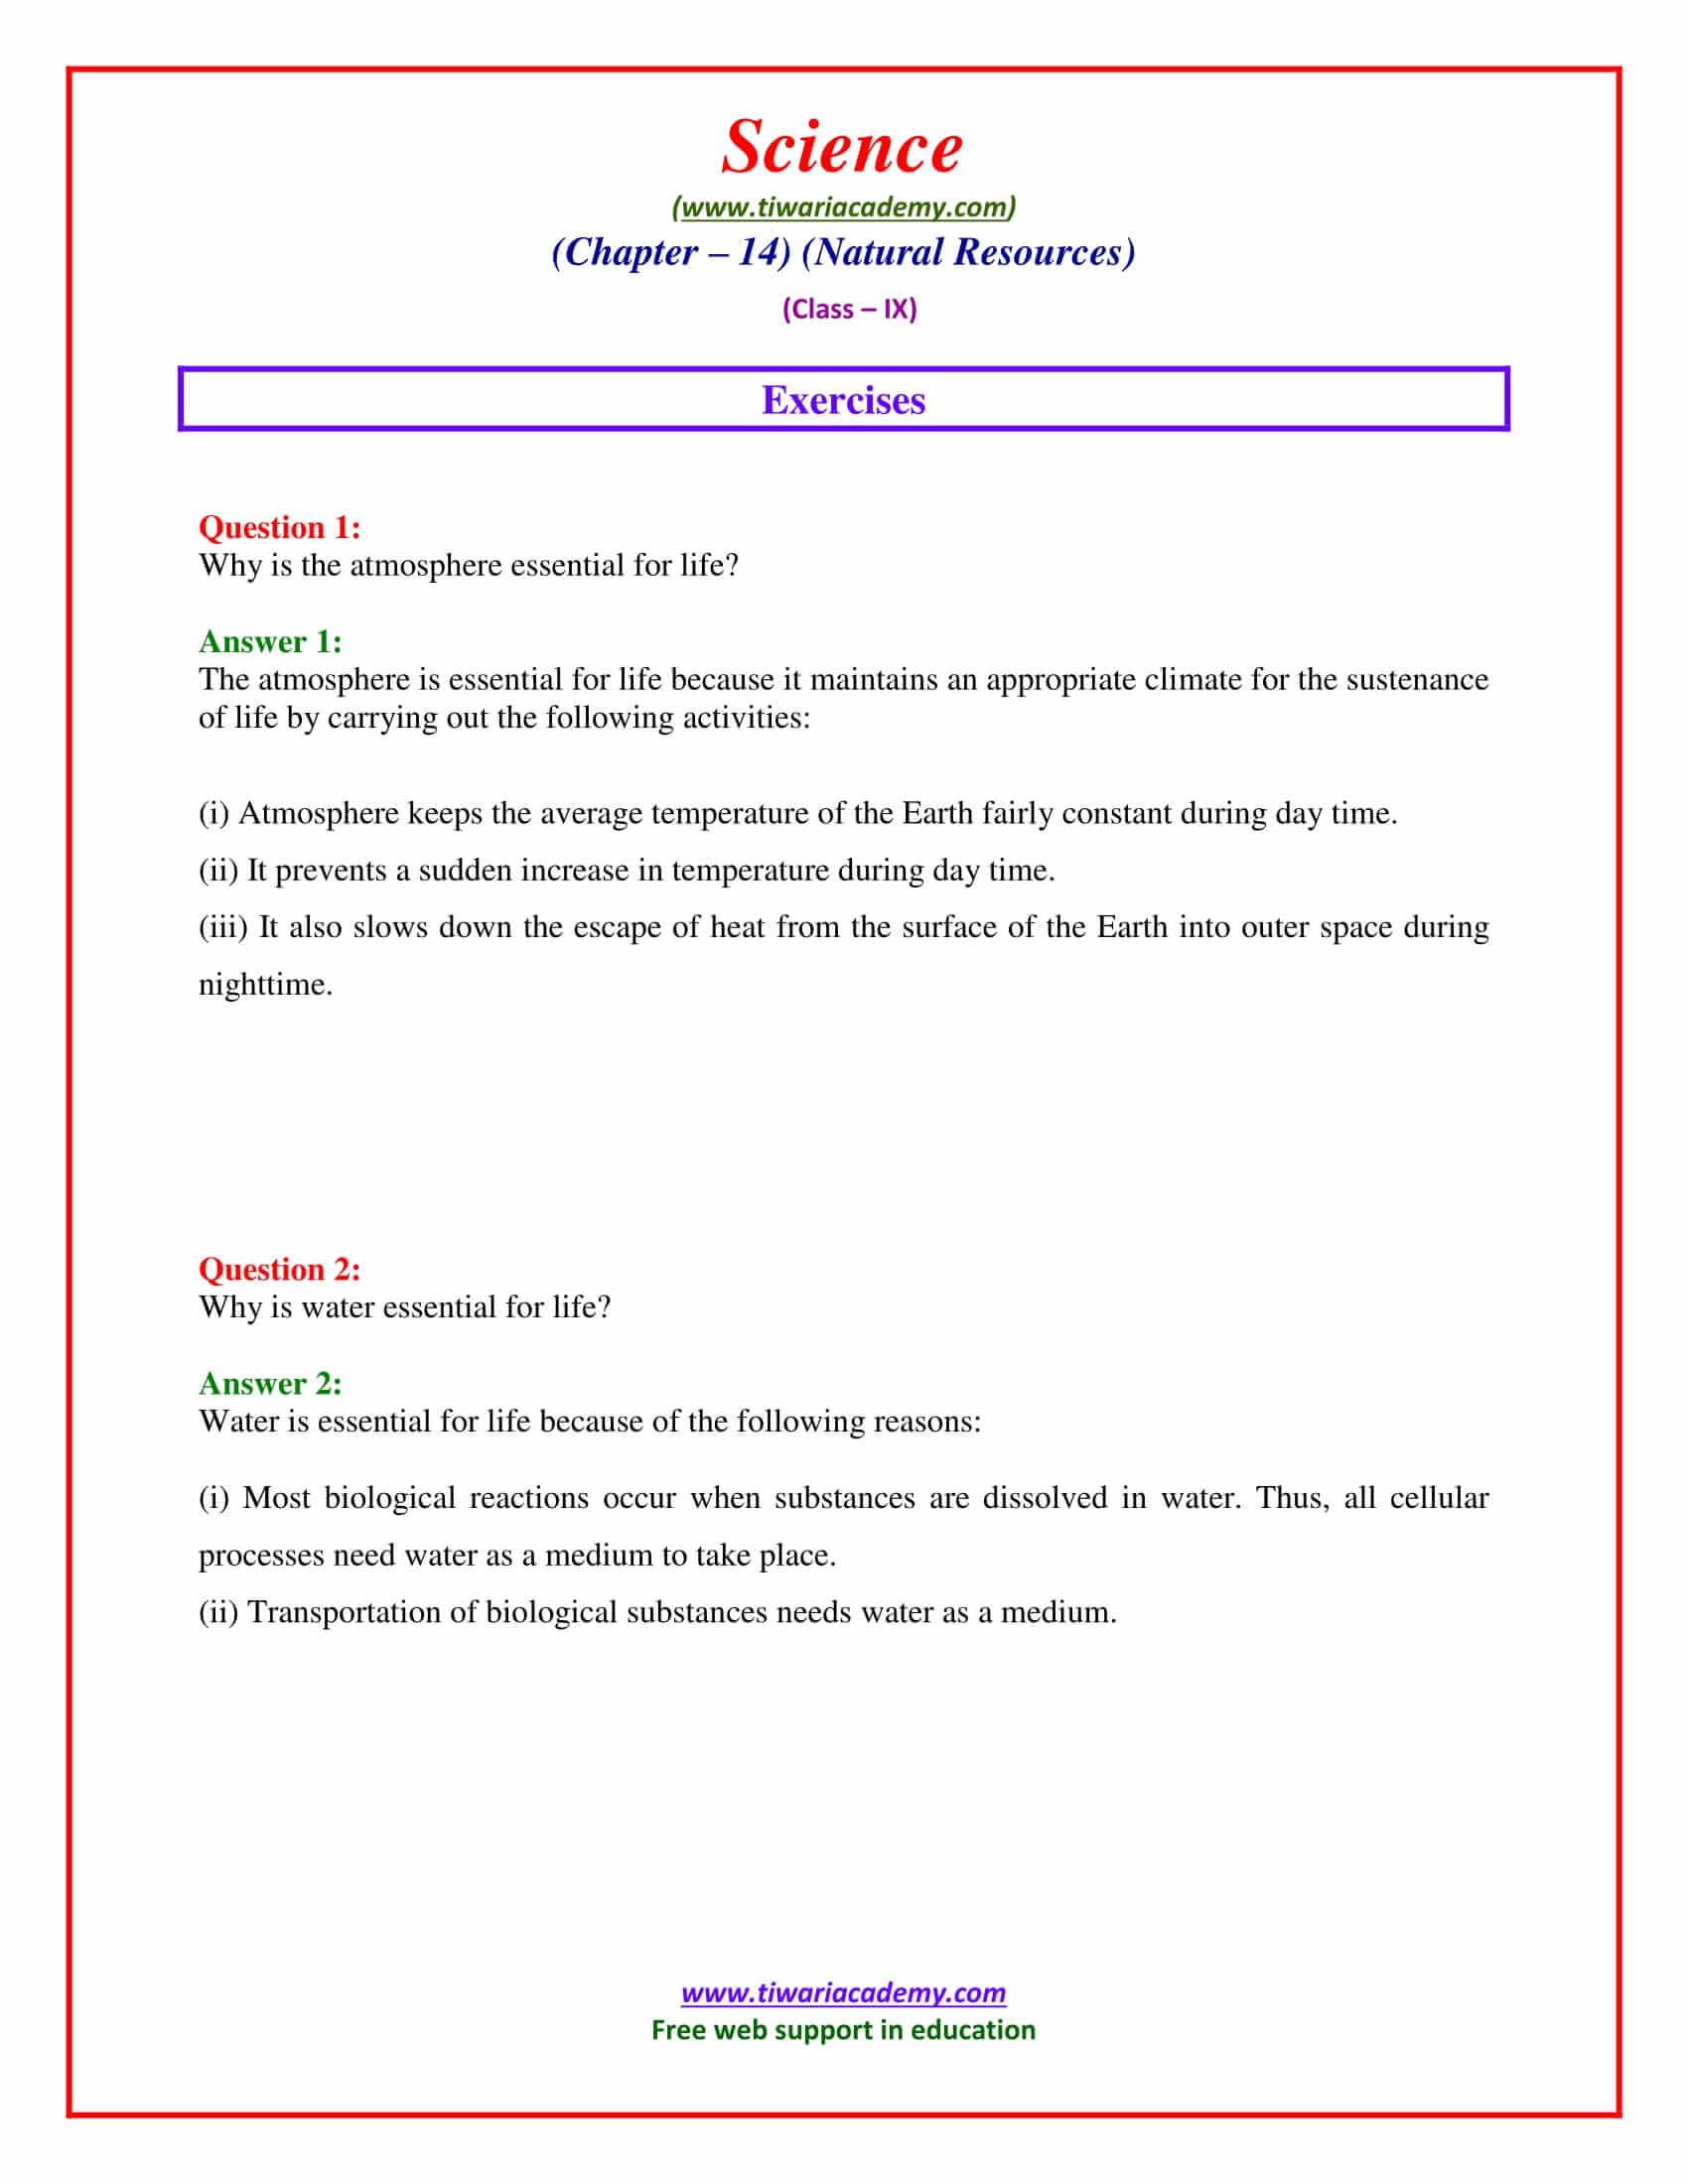 9 Science Chapter 14 Natural Resources Exercises Questions